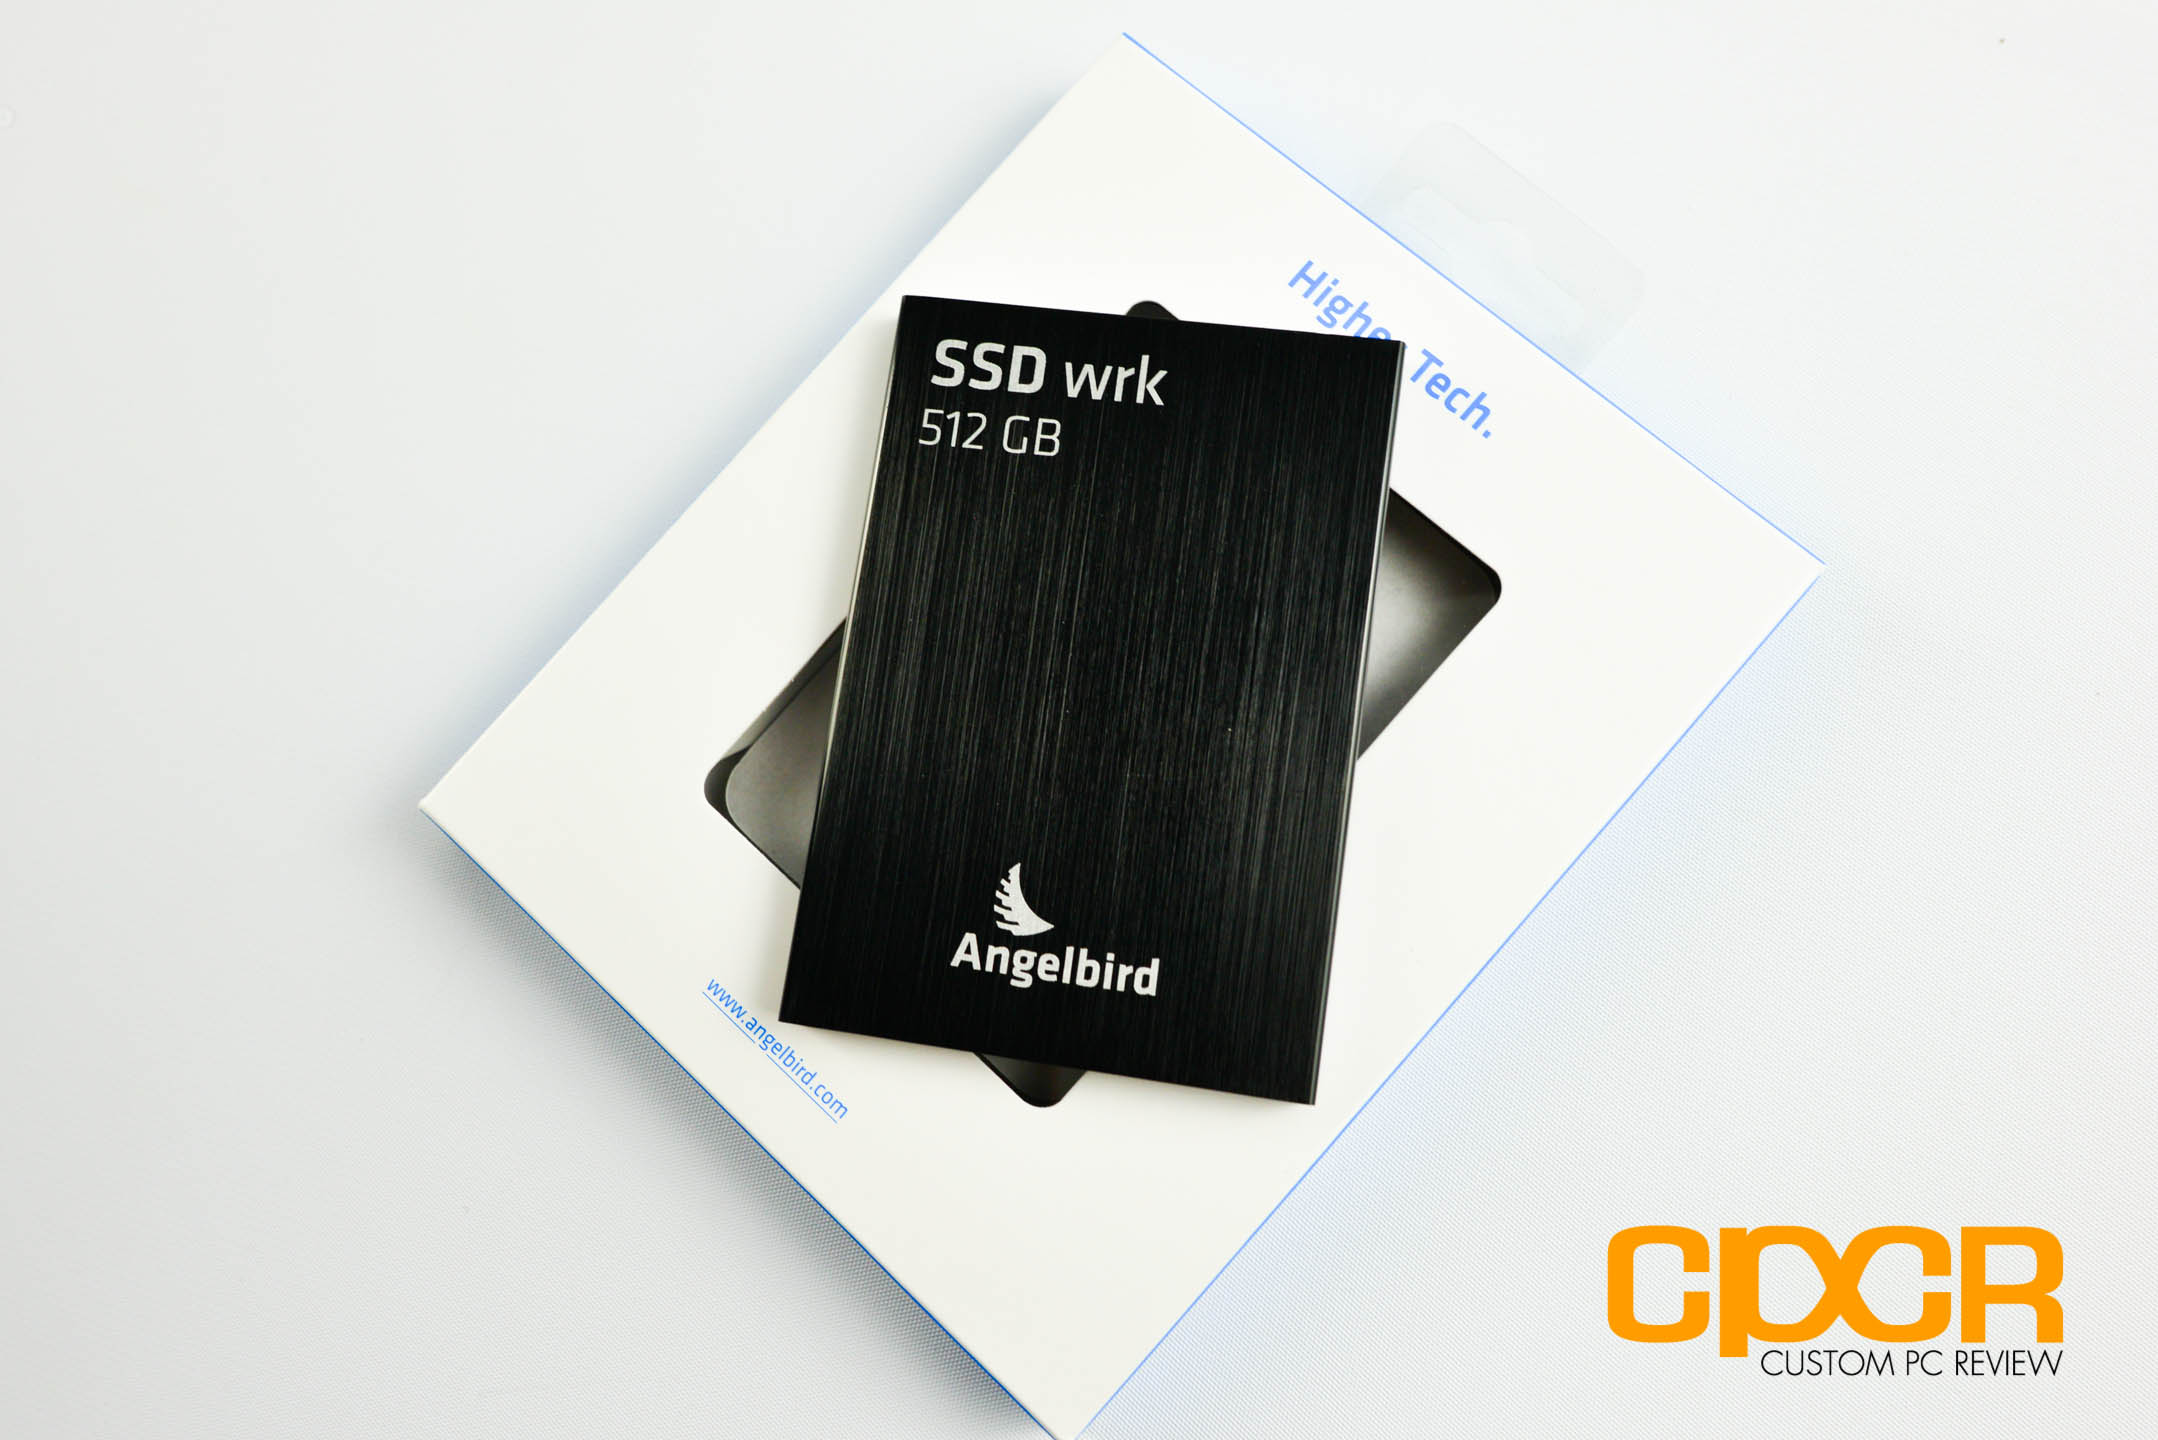 Review: Angelbird SSD wrk 512GB